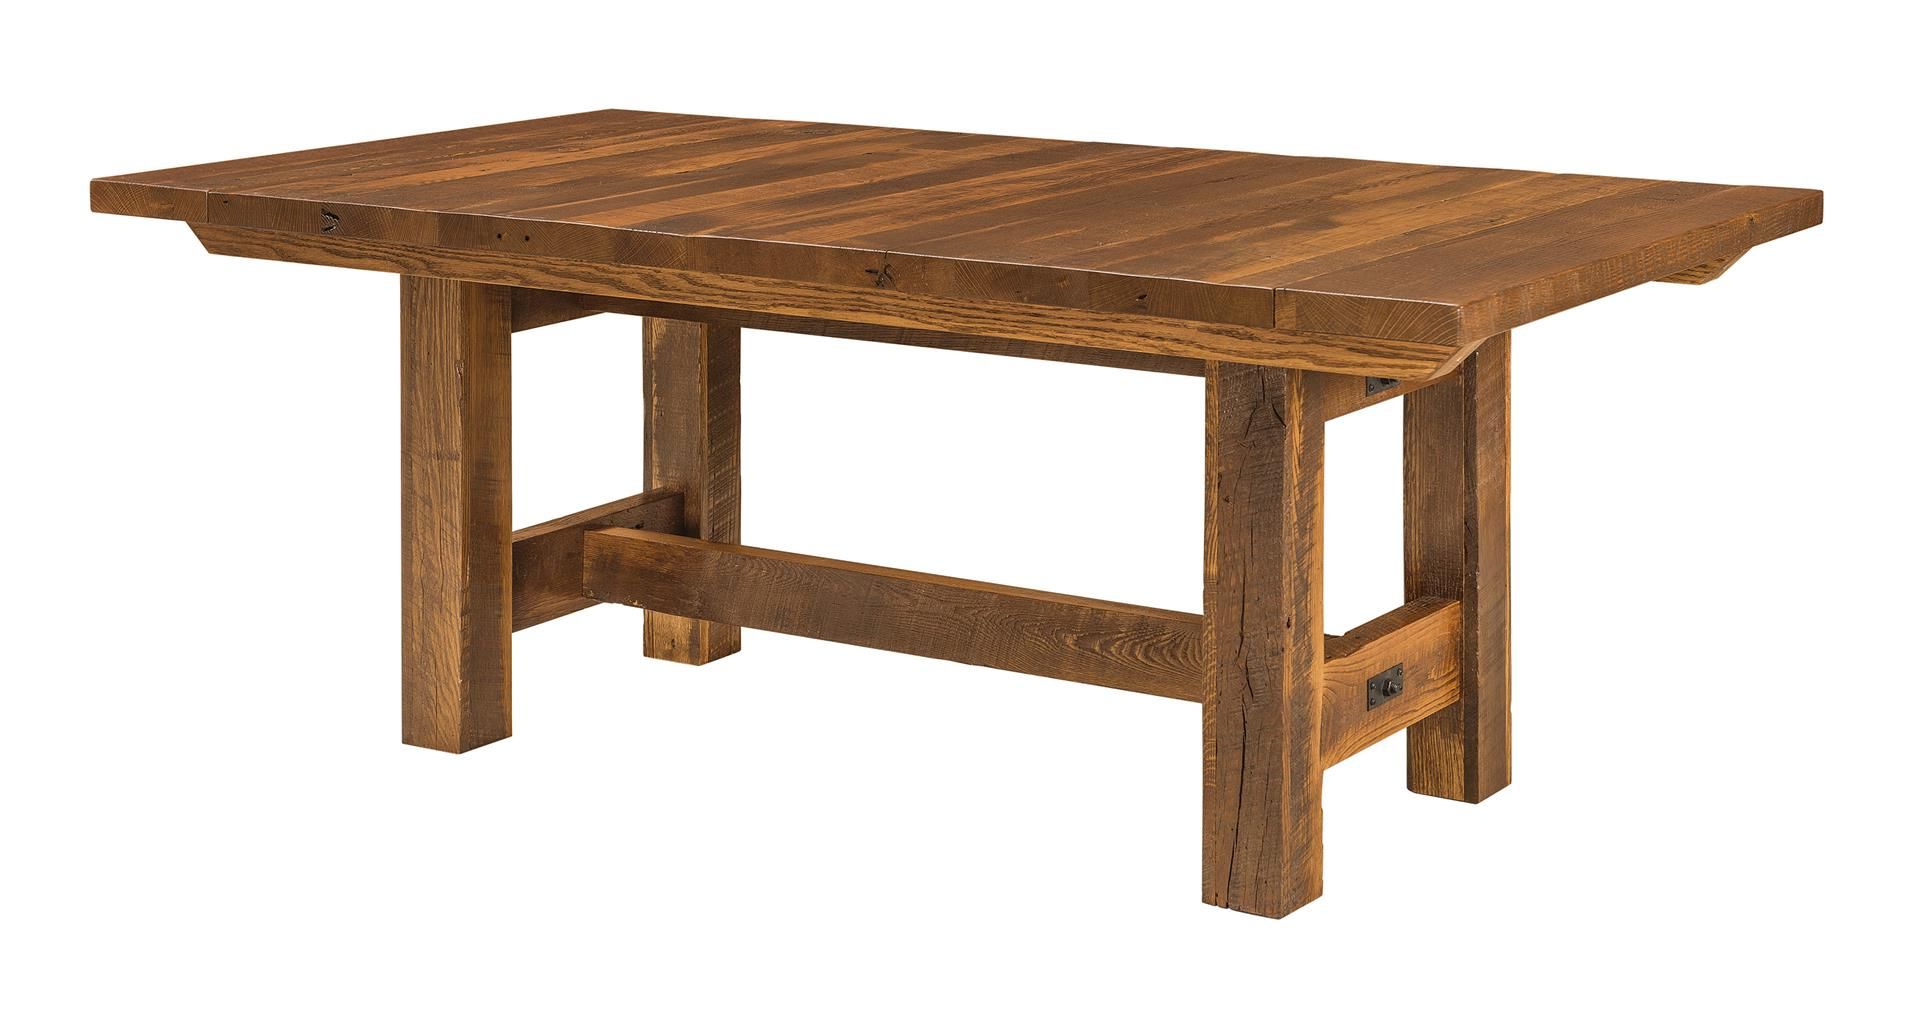 Trestle Dining Tables Throughout Trendy Lynchburg Reclaimed Barn Wood Trestle Dining Table (View 17 of 20)